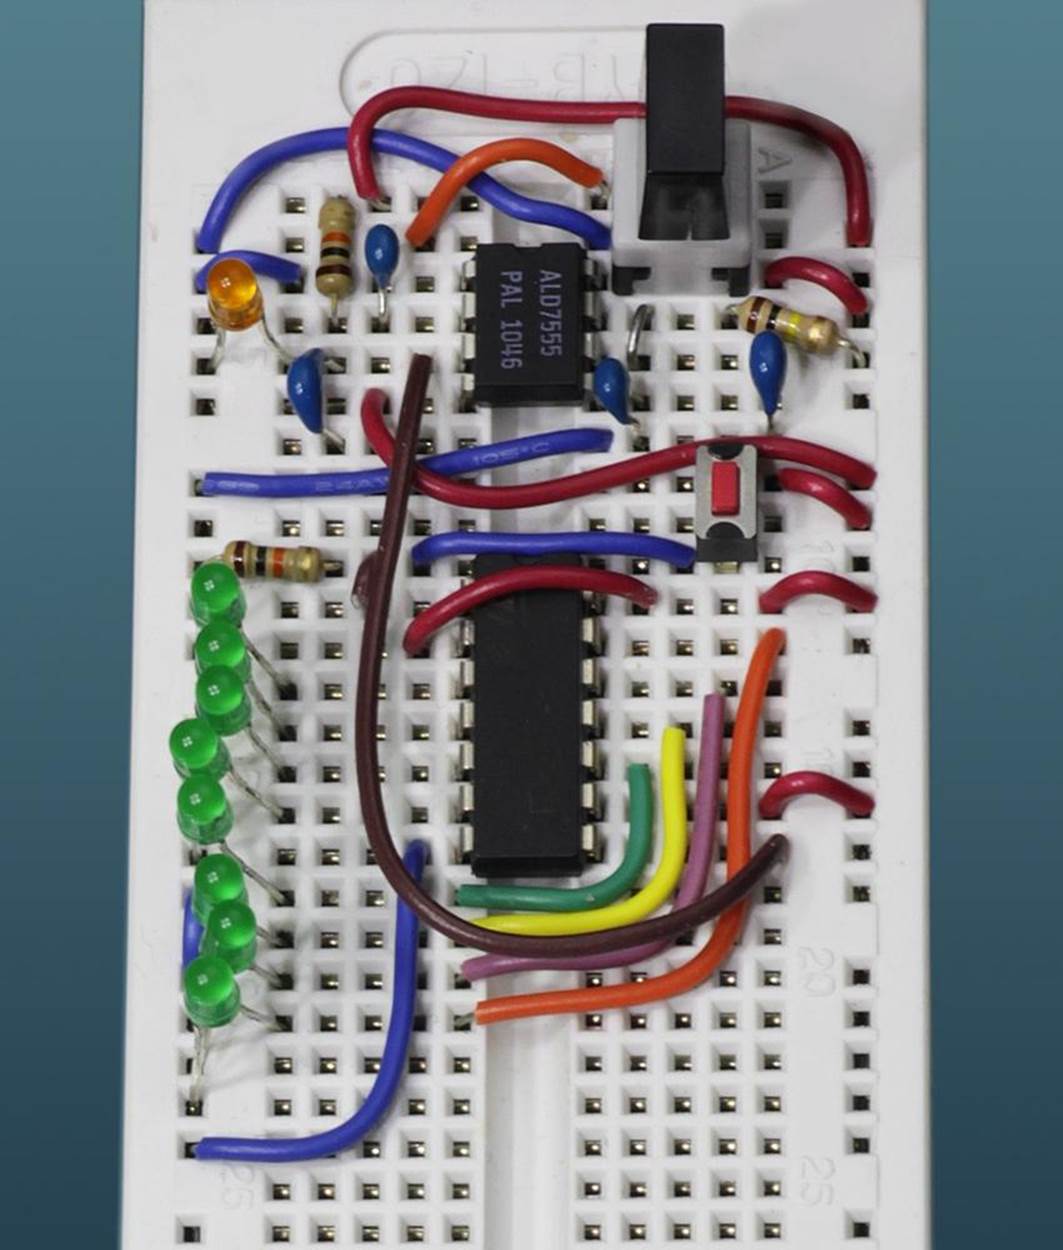 The breadboarded version of the shift-register test circuit.